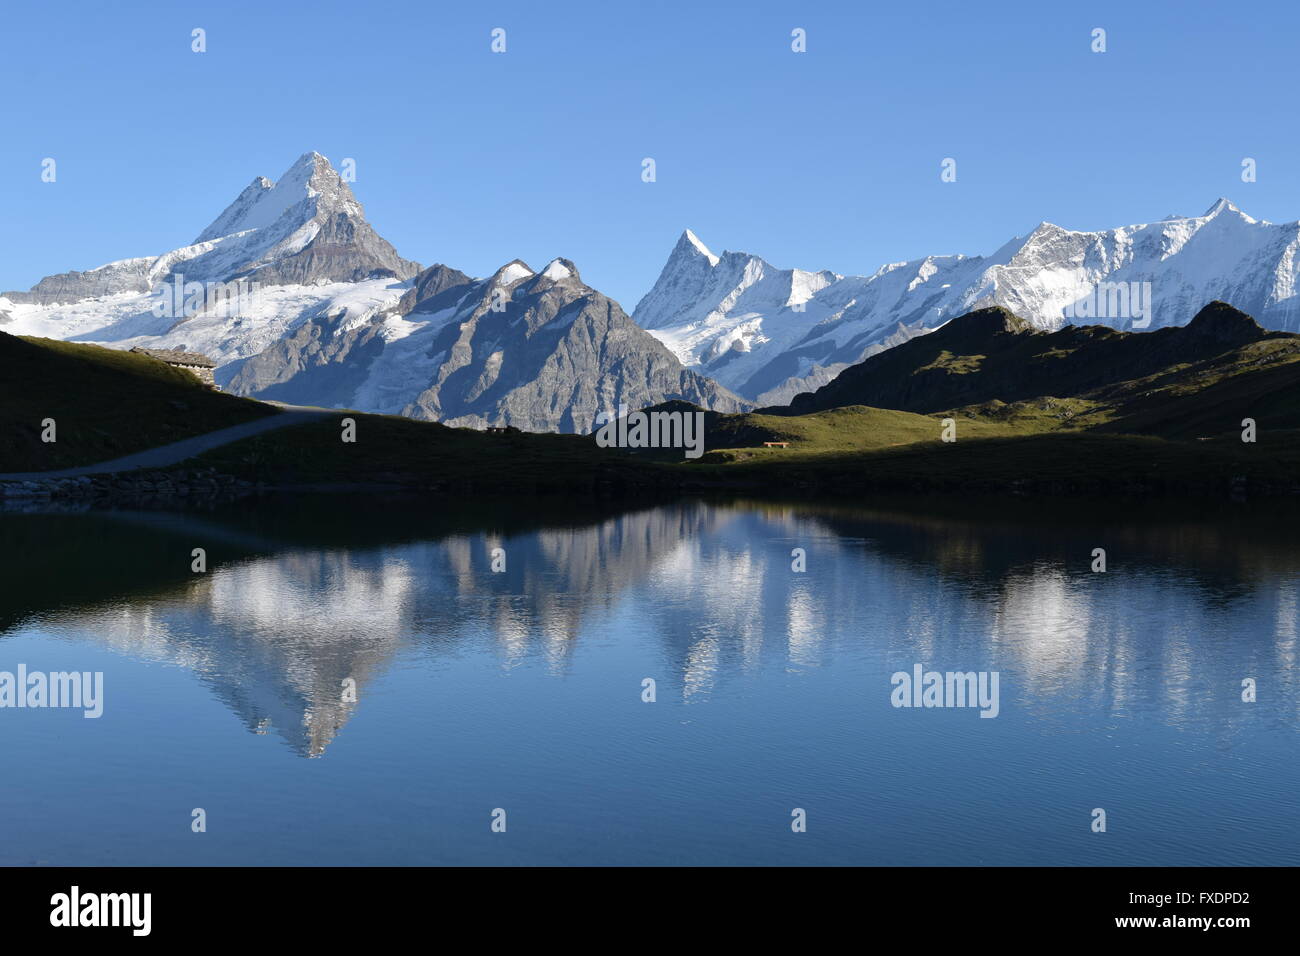 Mountains reflected in Bachalpsee lake Stock Photo